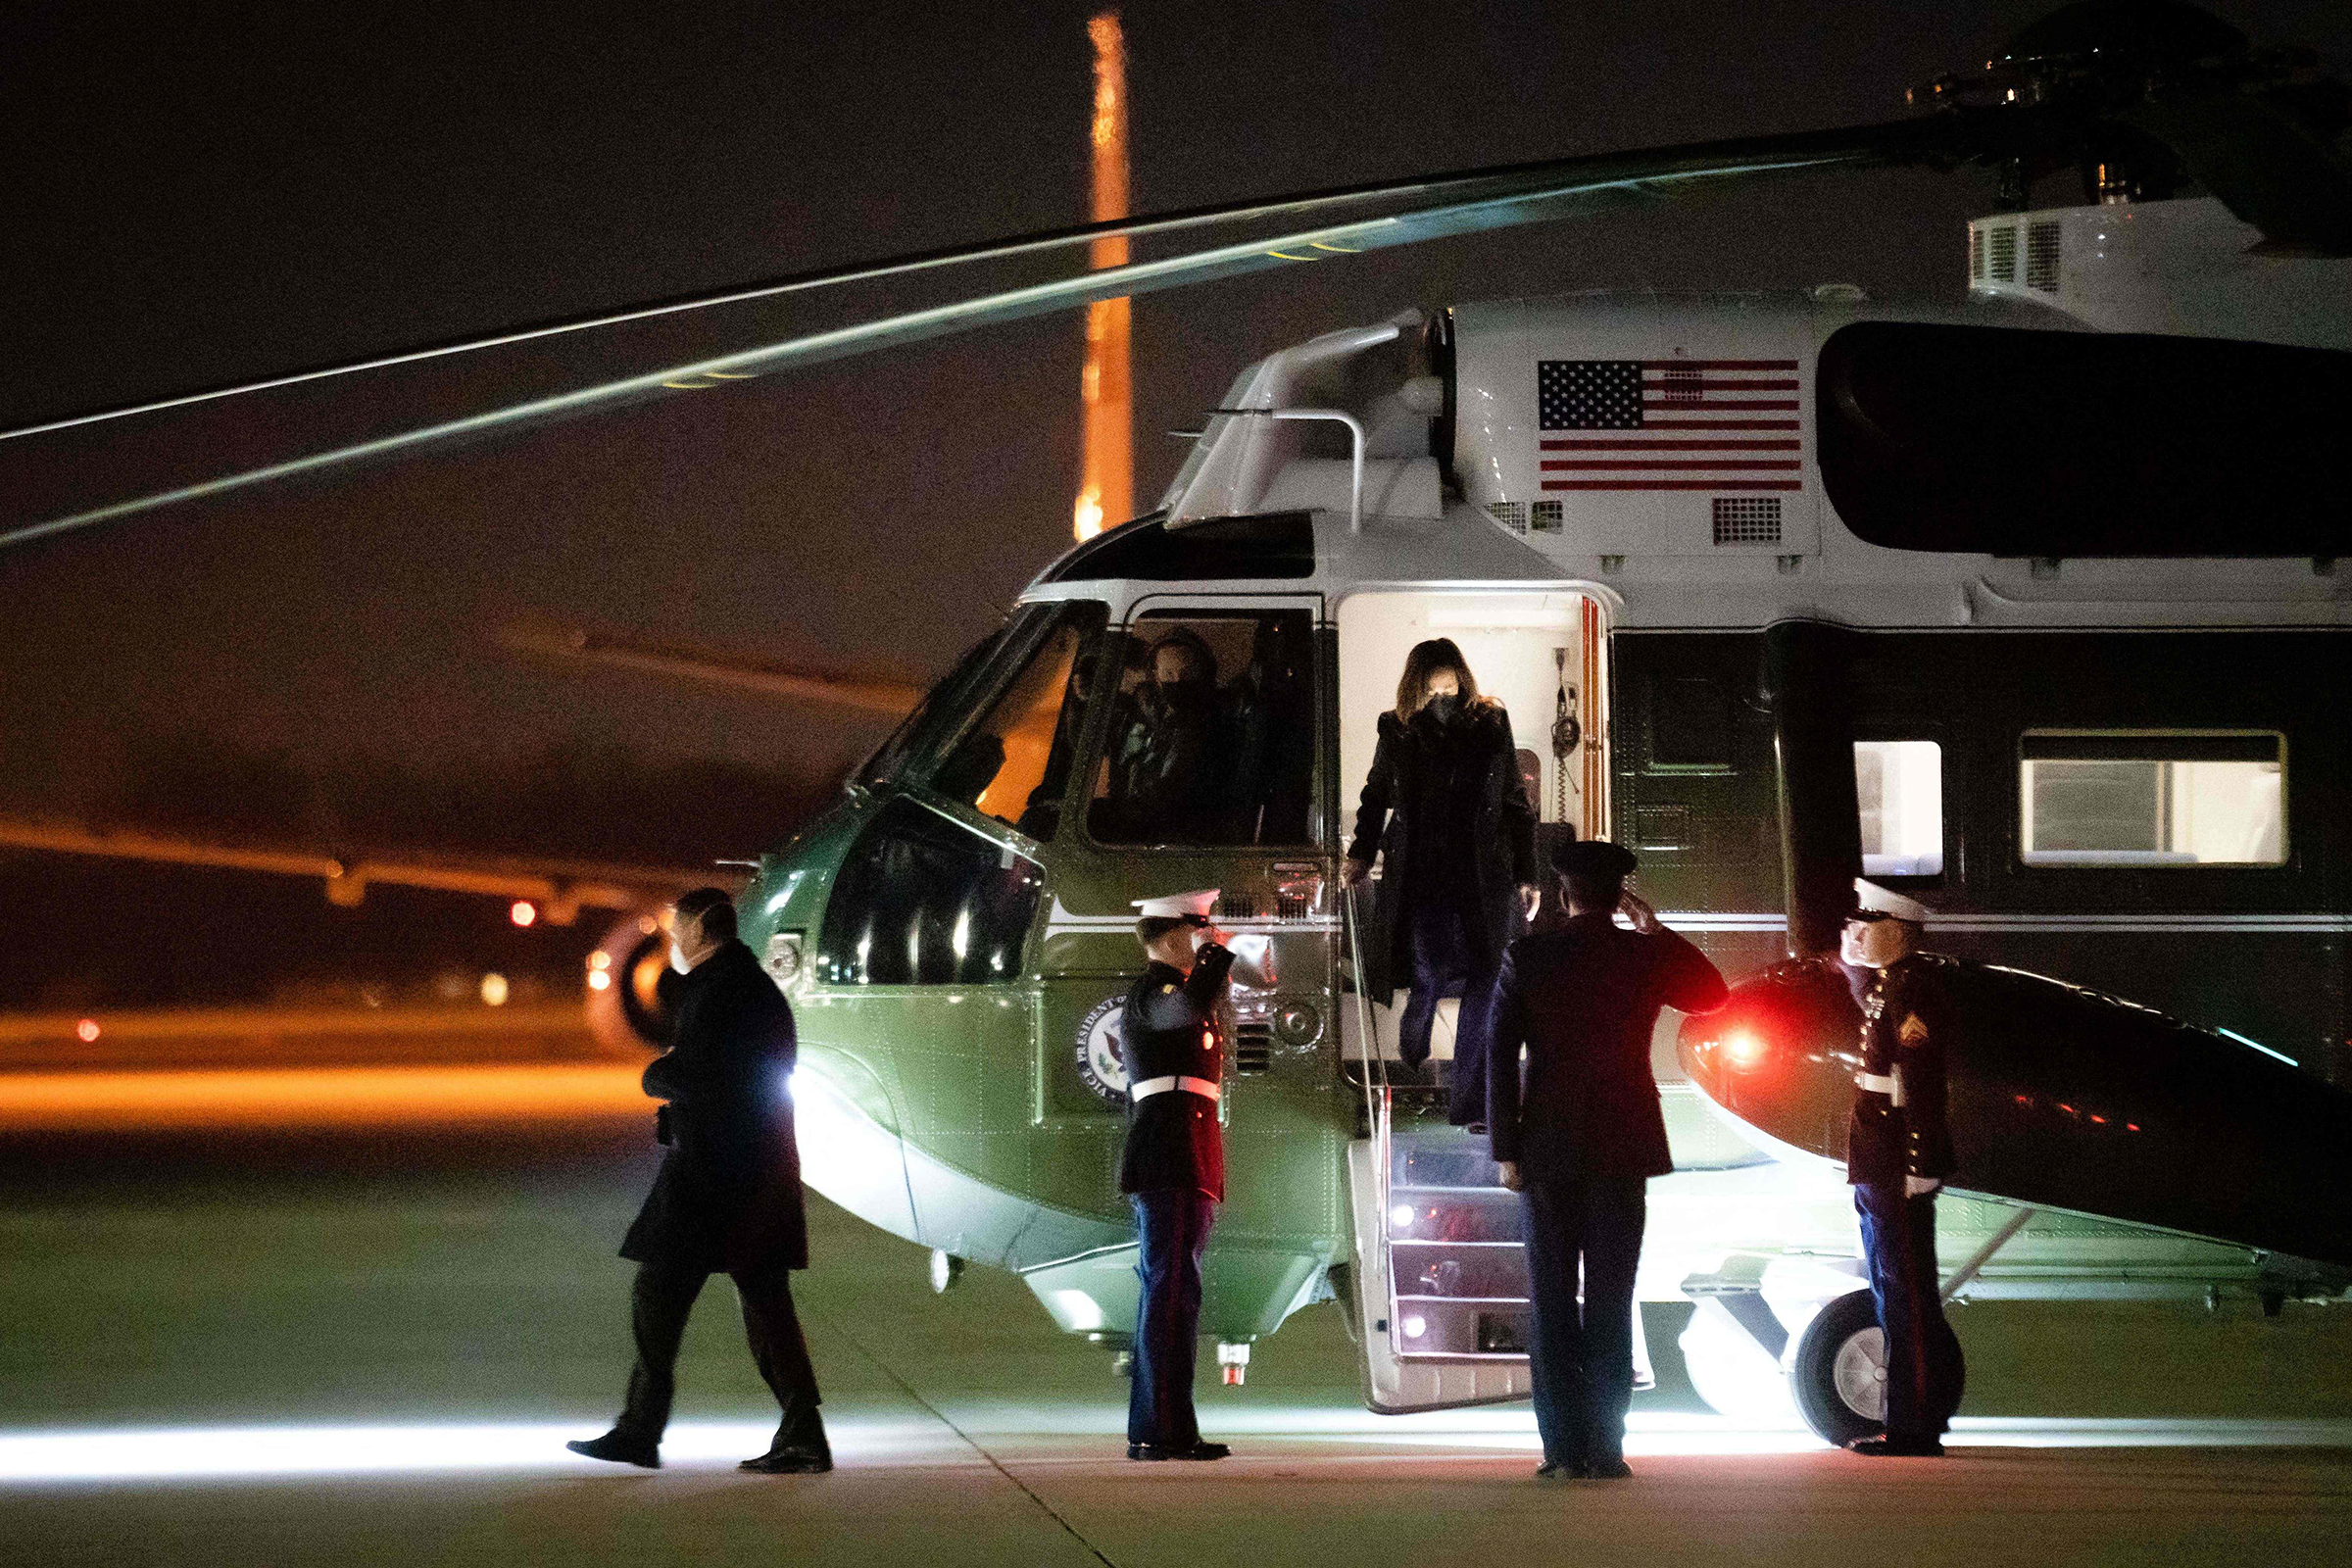 US Vice President Kamala Harris (C) walks off a helicopter to board Air Force Two for a trip to Honduras to attend the inauguration ceremony for Honduran President-elect Xiomara Castro, at Joint Base Andrews in Maryland early on January 27, 2022. (Erin Schaff—AFP/Getty Images)